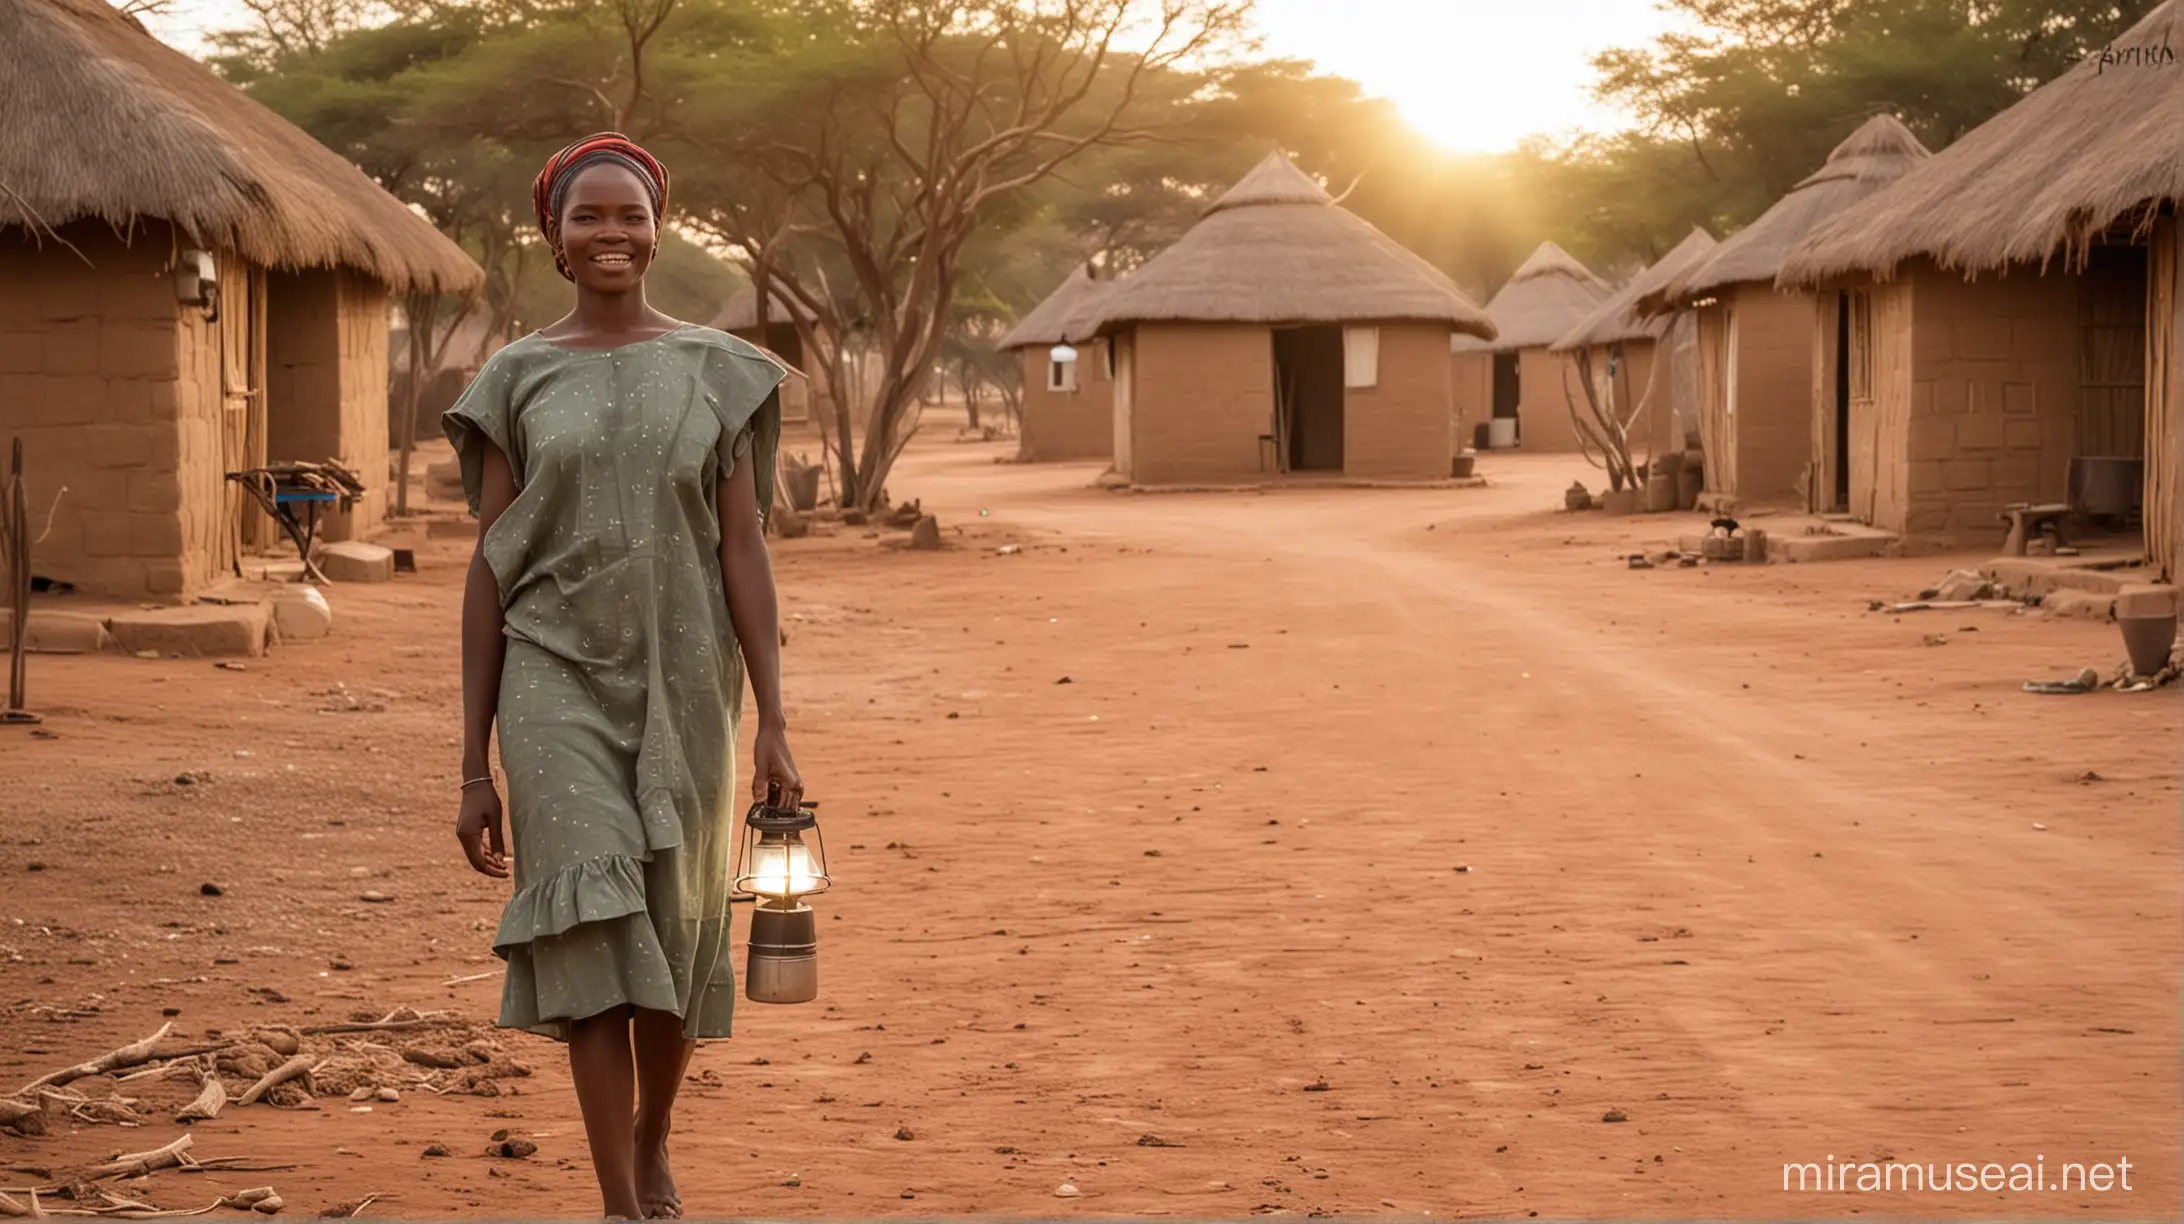 Rural african woman carrying solar light in rural set up with rondavel mud huts background